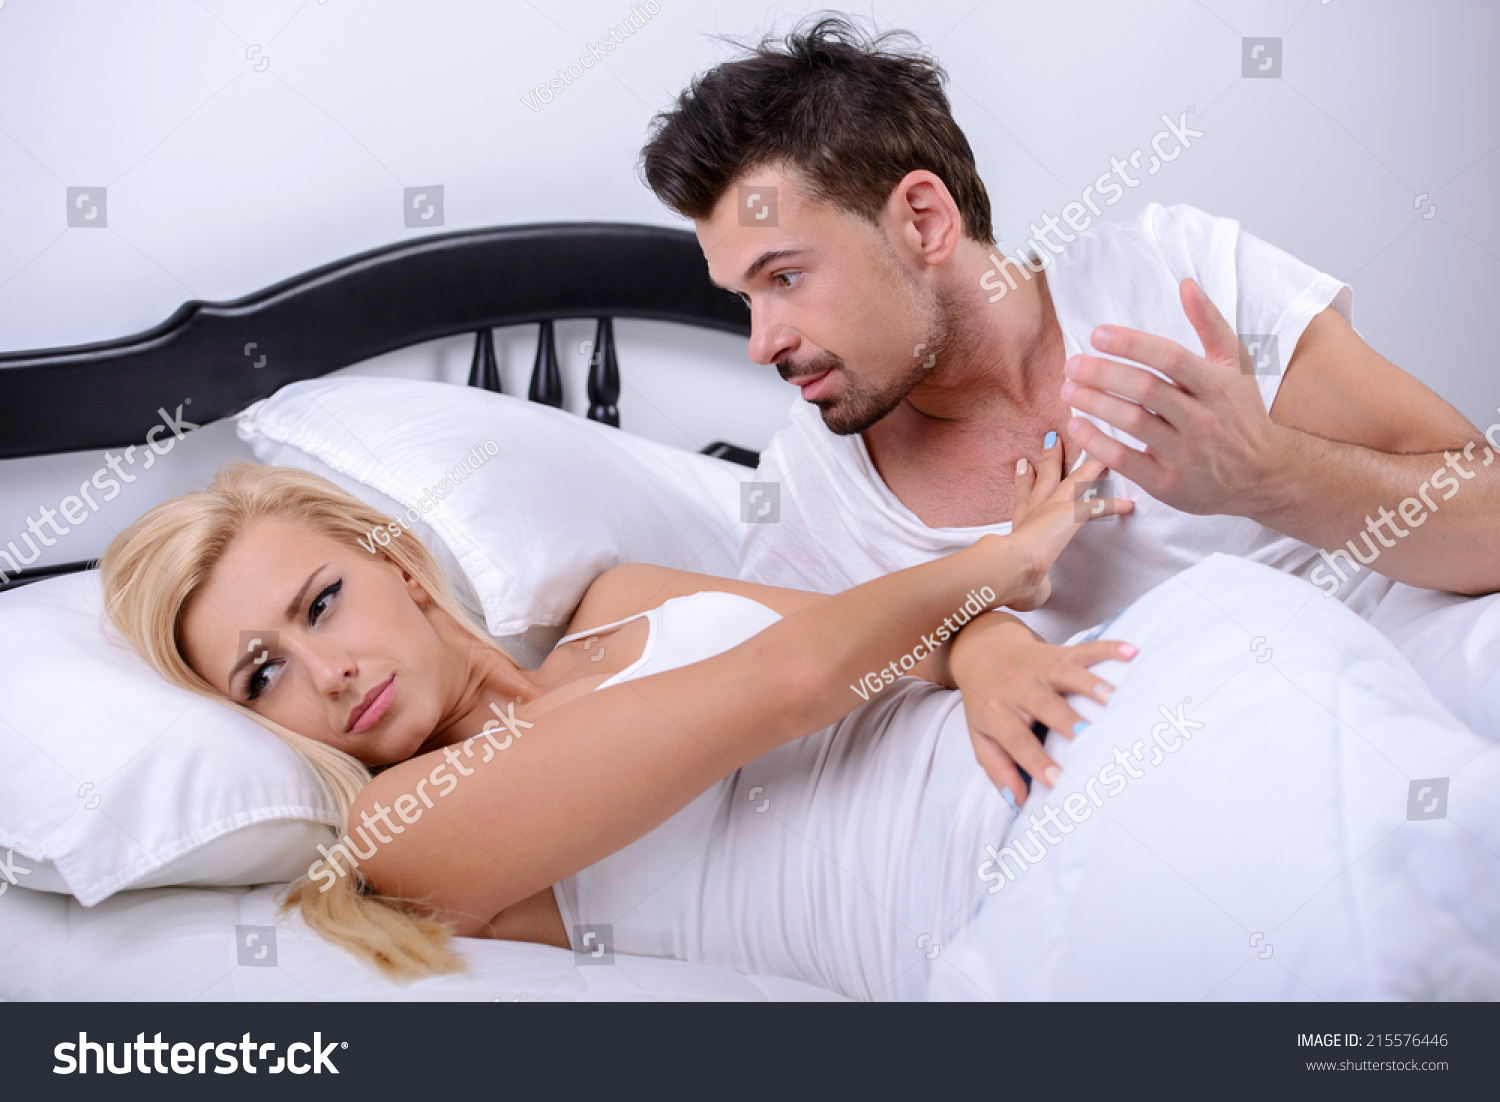 http://image.shutterstock.com/z/stock-photo-a-young-couple-quarreling-lying-in-bed-in-her-bedroom-215576446.jpg